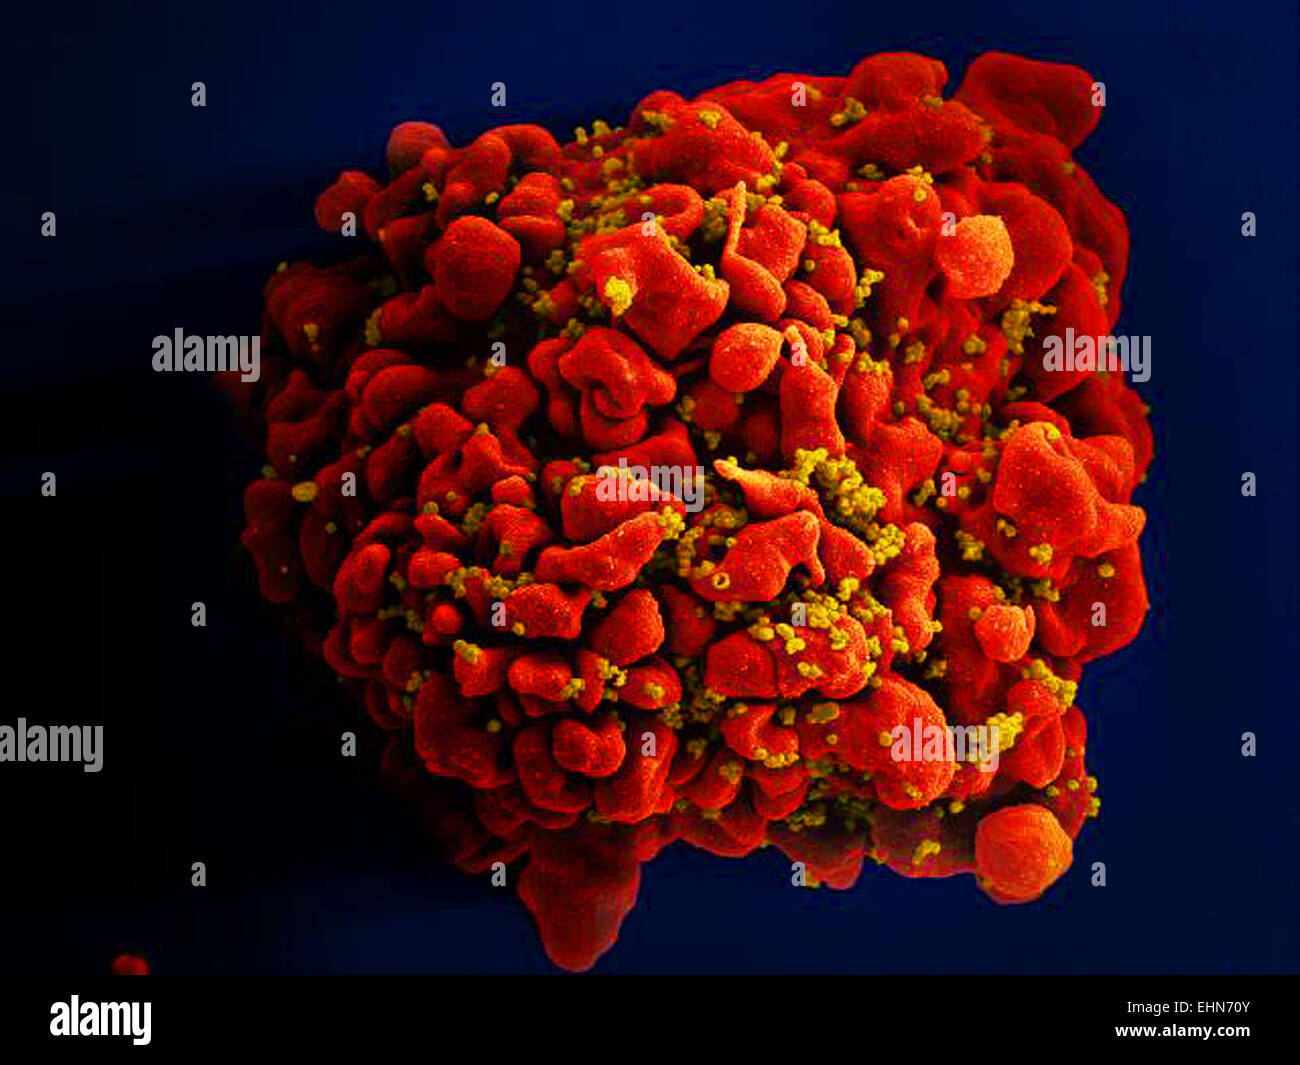 H9-T cell infected by numerous, spheroid-shaped, human immunodeficiency virus (HIV) particles, which can be seen sttached to the cell's surface membrane, (SEM). Stock Photo